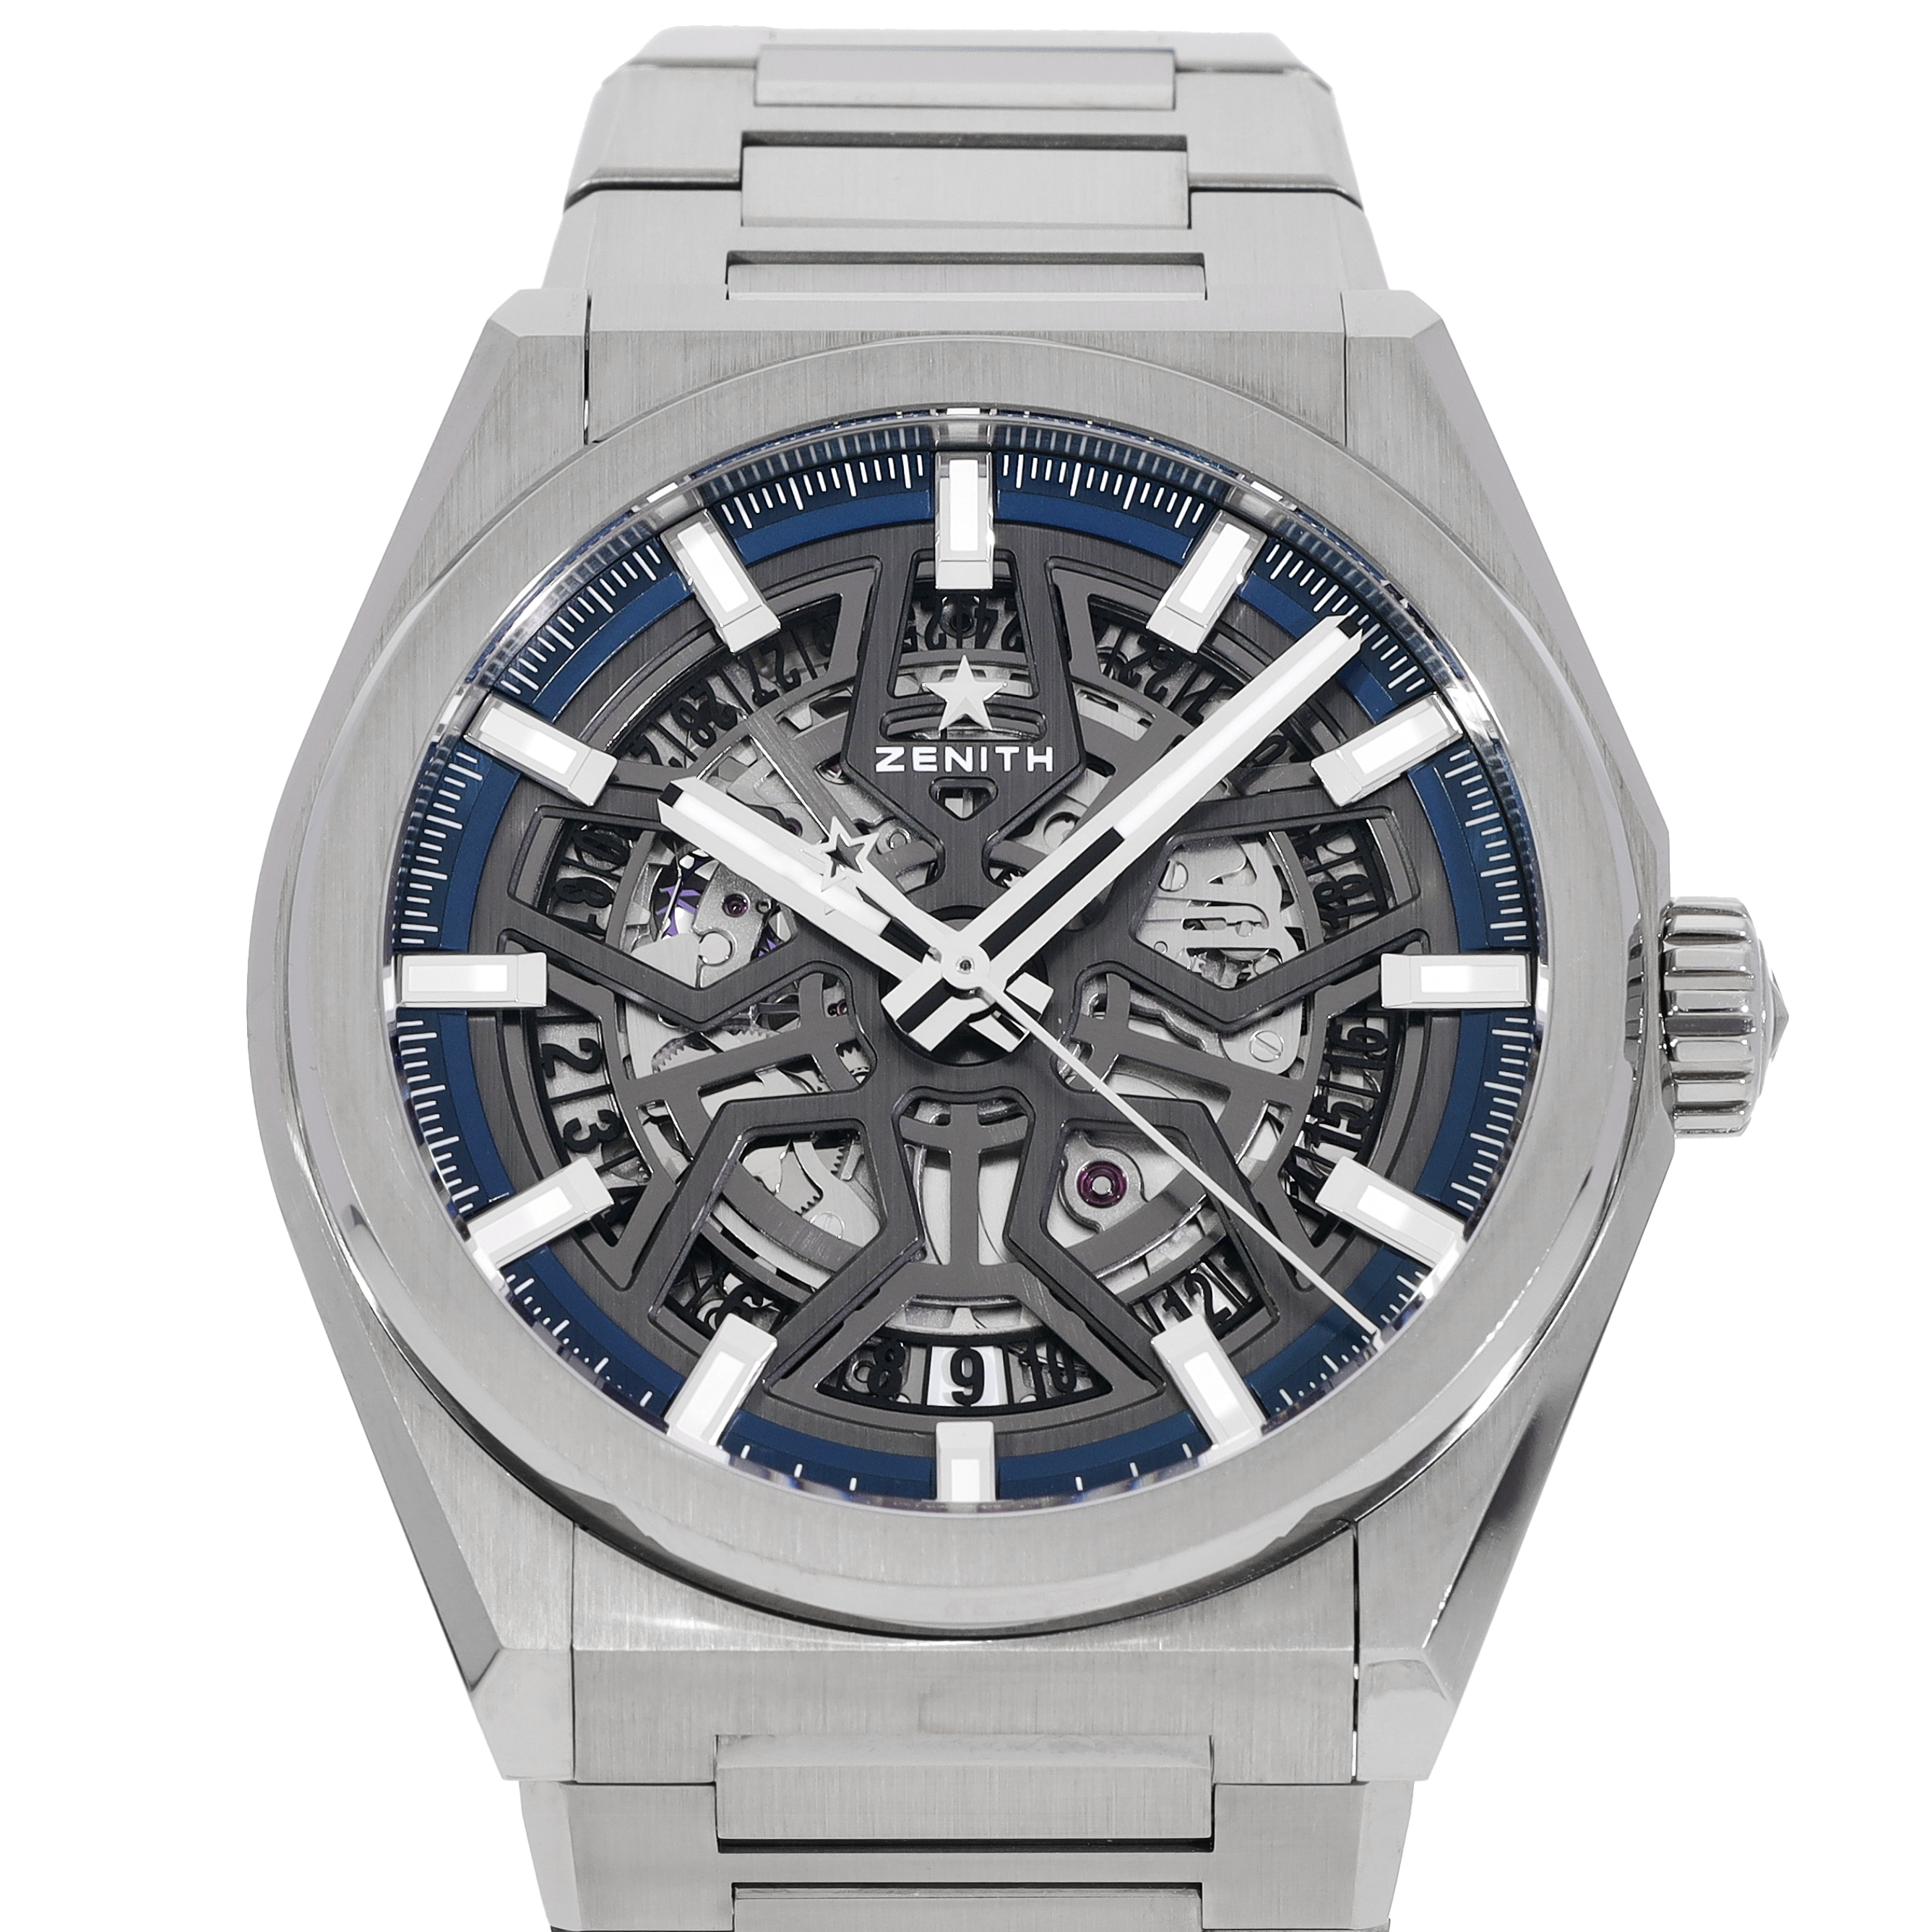 Zenith Defy Skyline Ladies Automatic Watch; Pink Dial; 36 mm Stainless Steel Bracelet 03.9400.670/18.I001